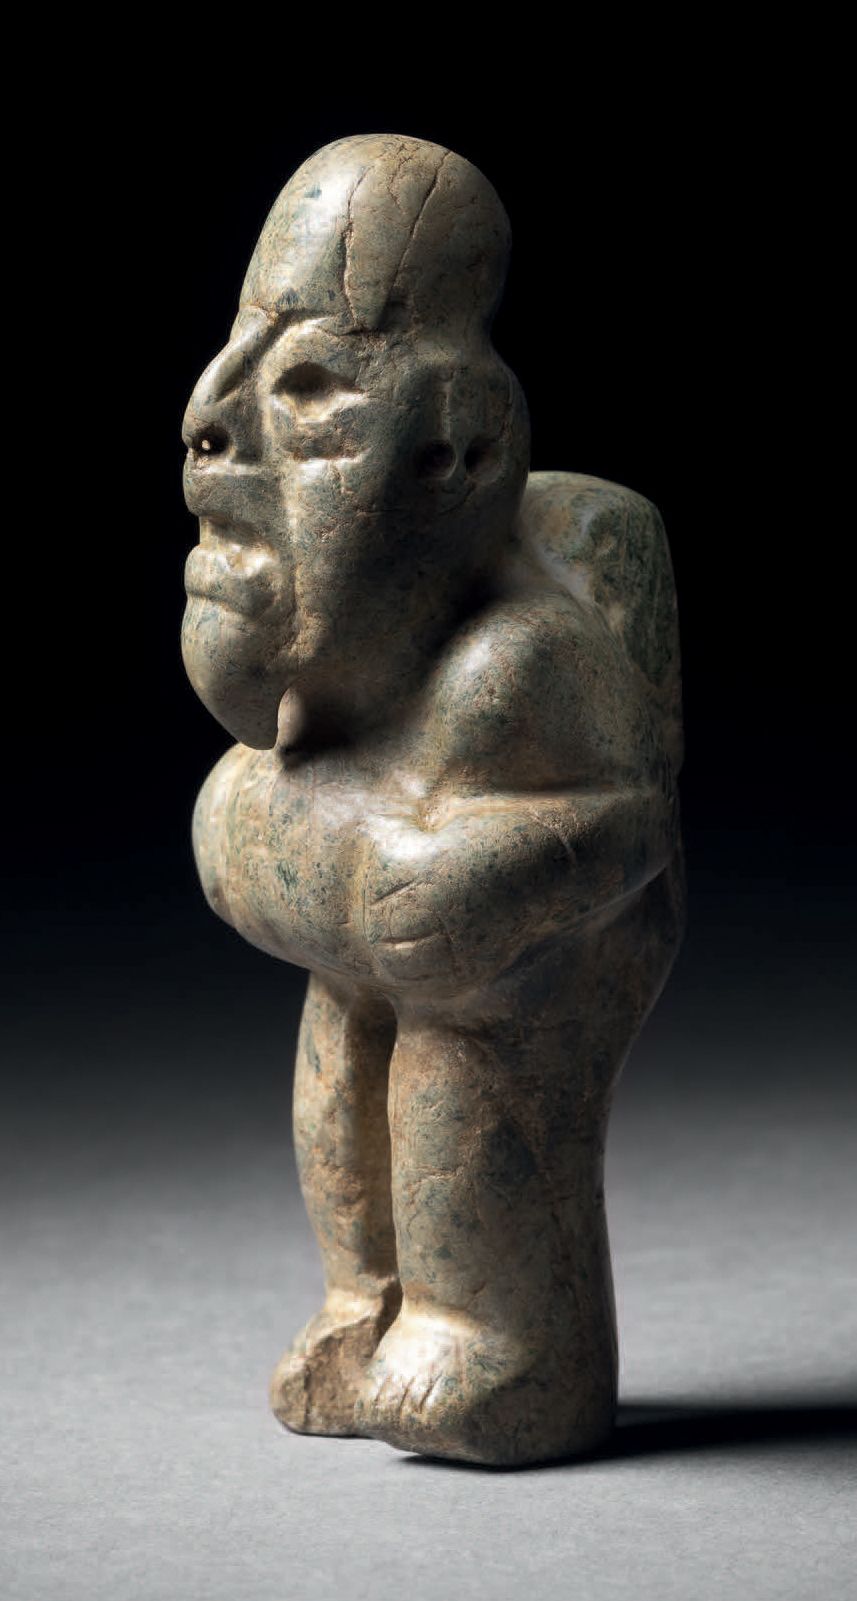 Null BEARDED FIGURE WITH A HUNCH ON THE BACK Olmec culture
Las Bocas, Mexico
Mid&hellip;